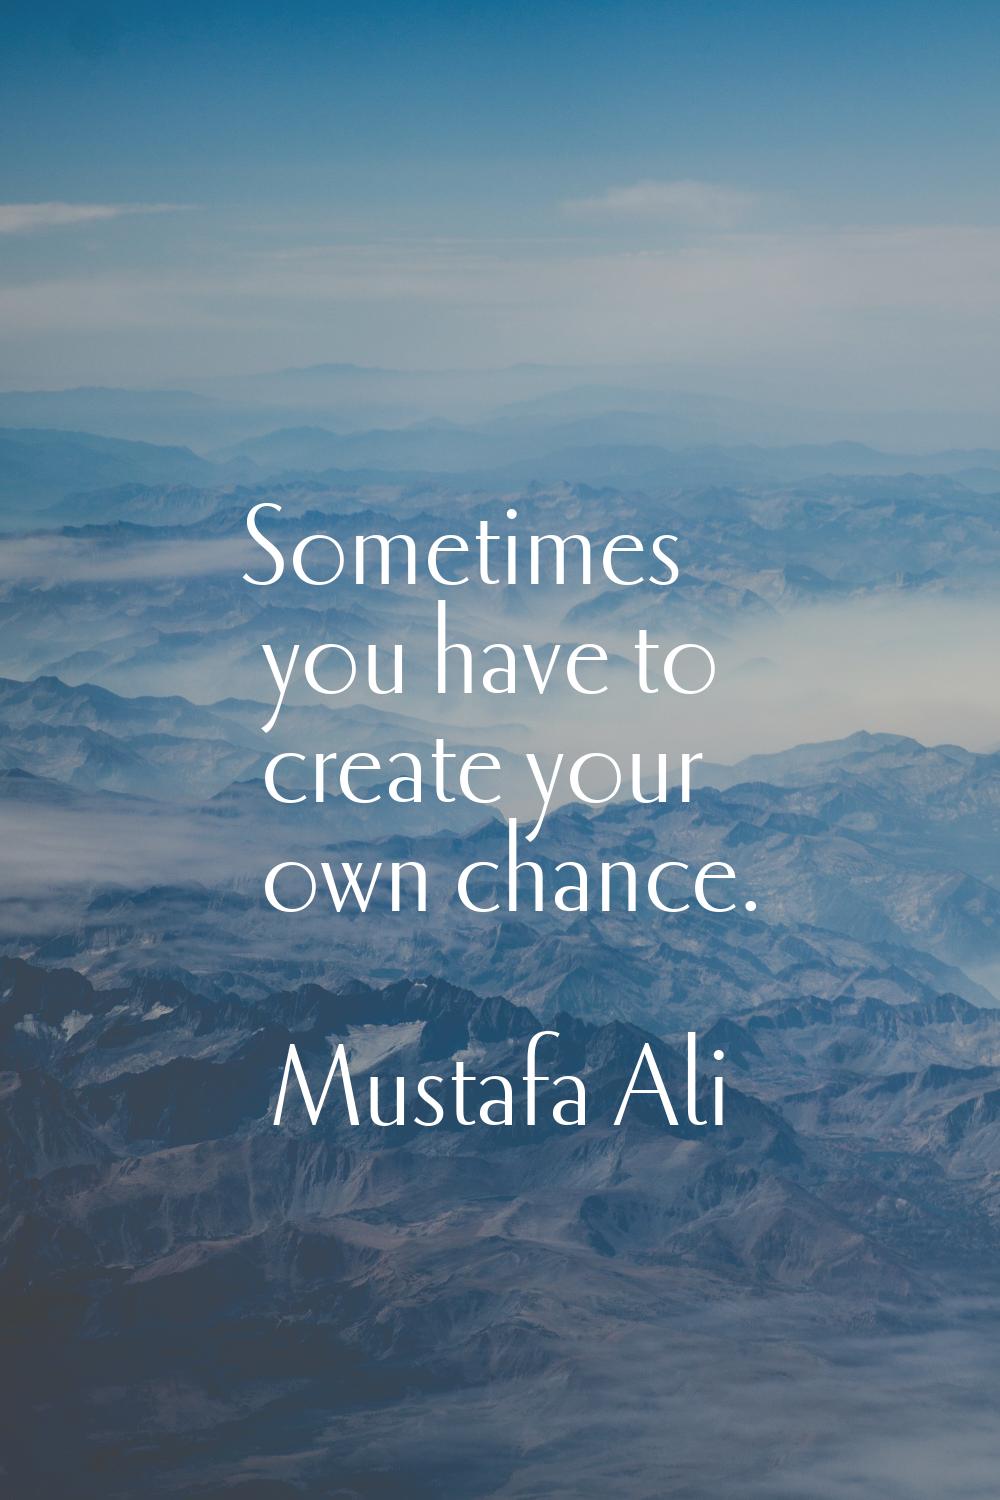 Sometimes you have to create your own chance.